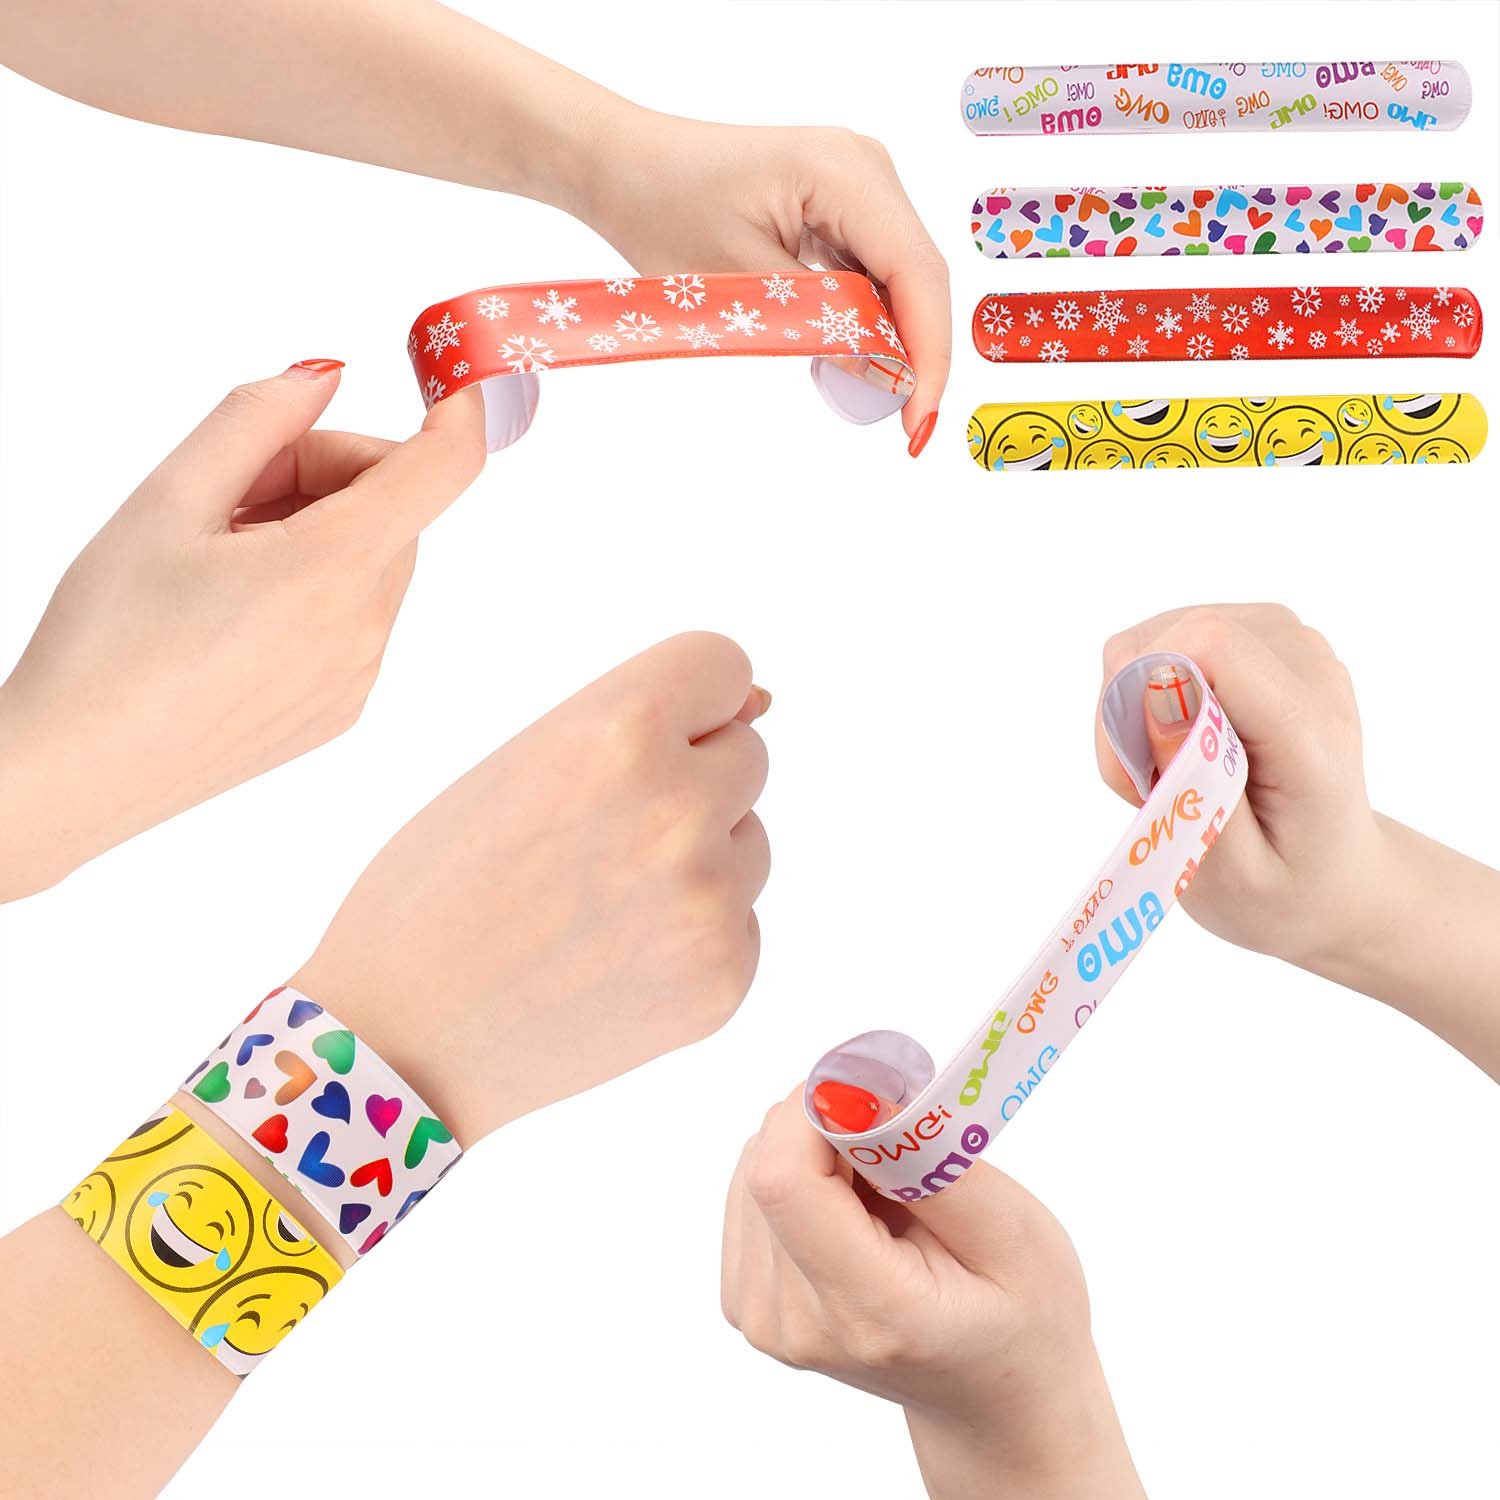 100 PCS Slap Bracelets Party Favors with Colorful Hearts Animal Print Design Retro Slap Bands for Kids Adults Birthday Classroom Gifts (100PCS)